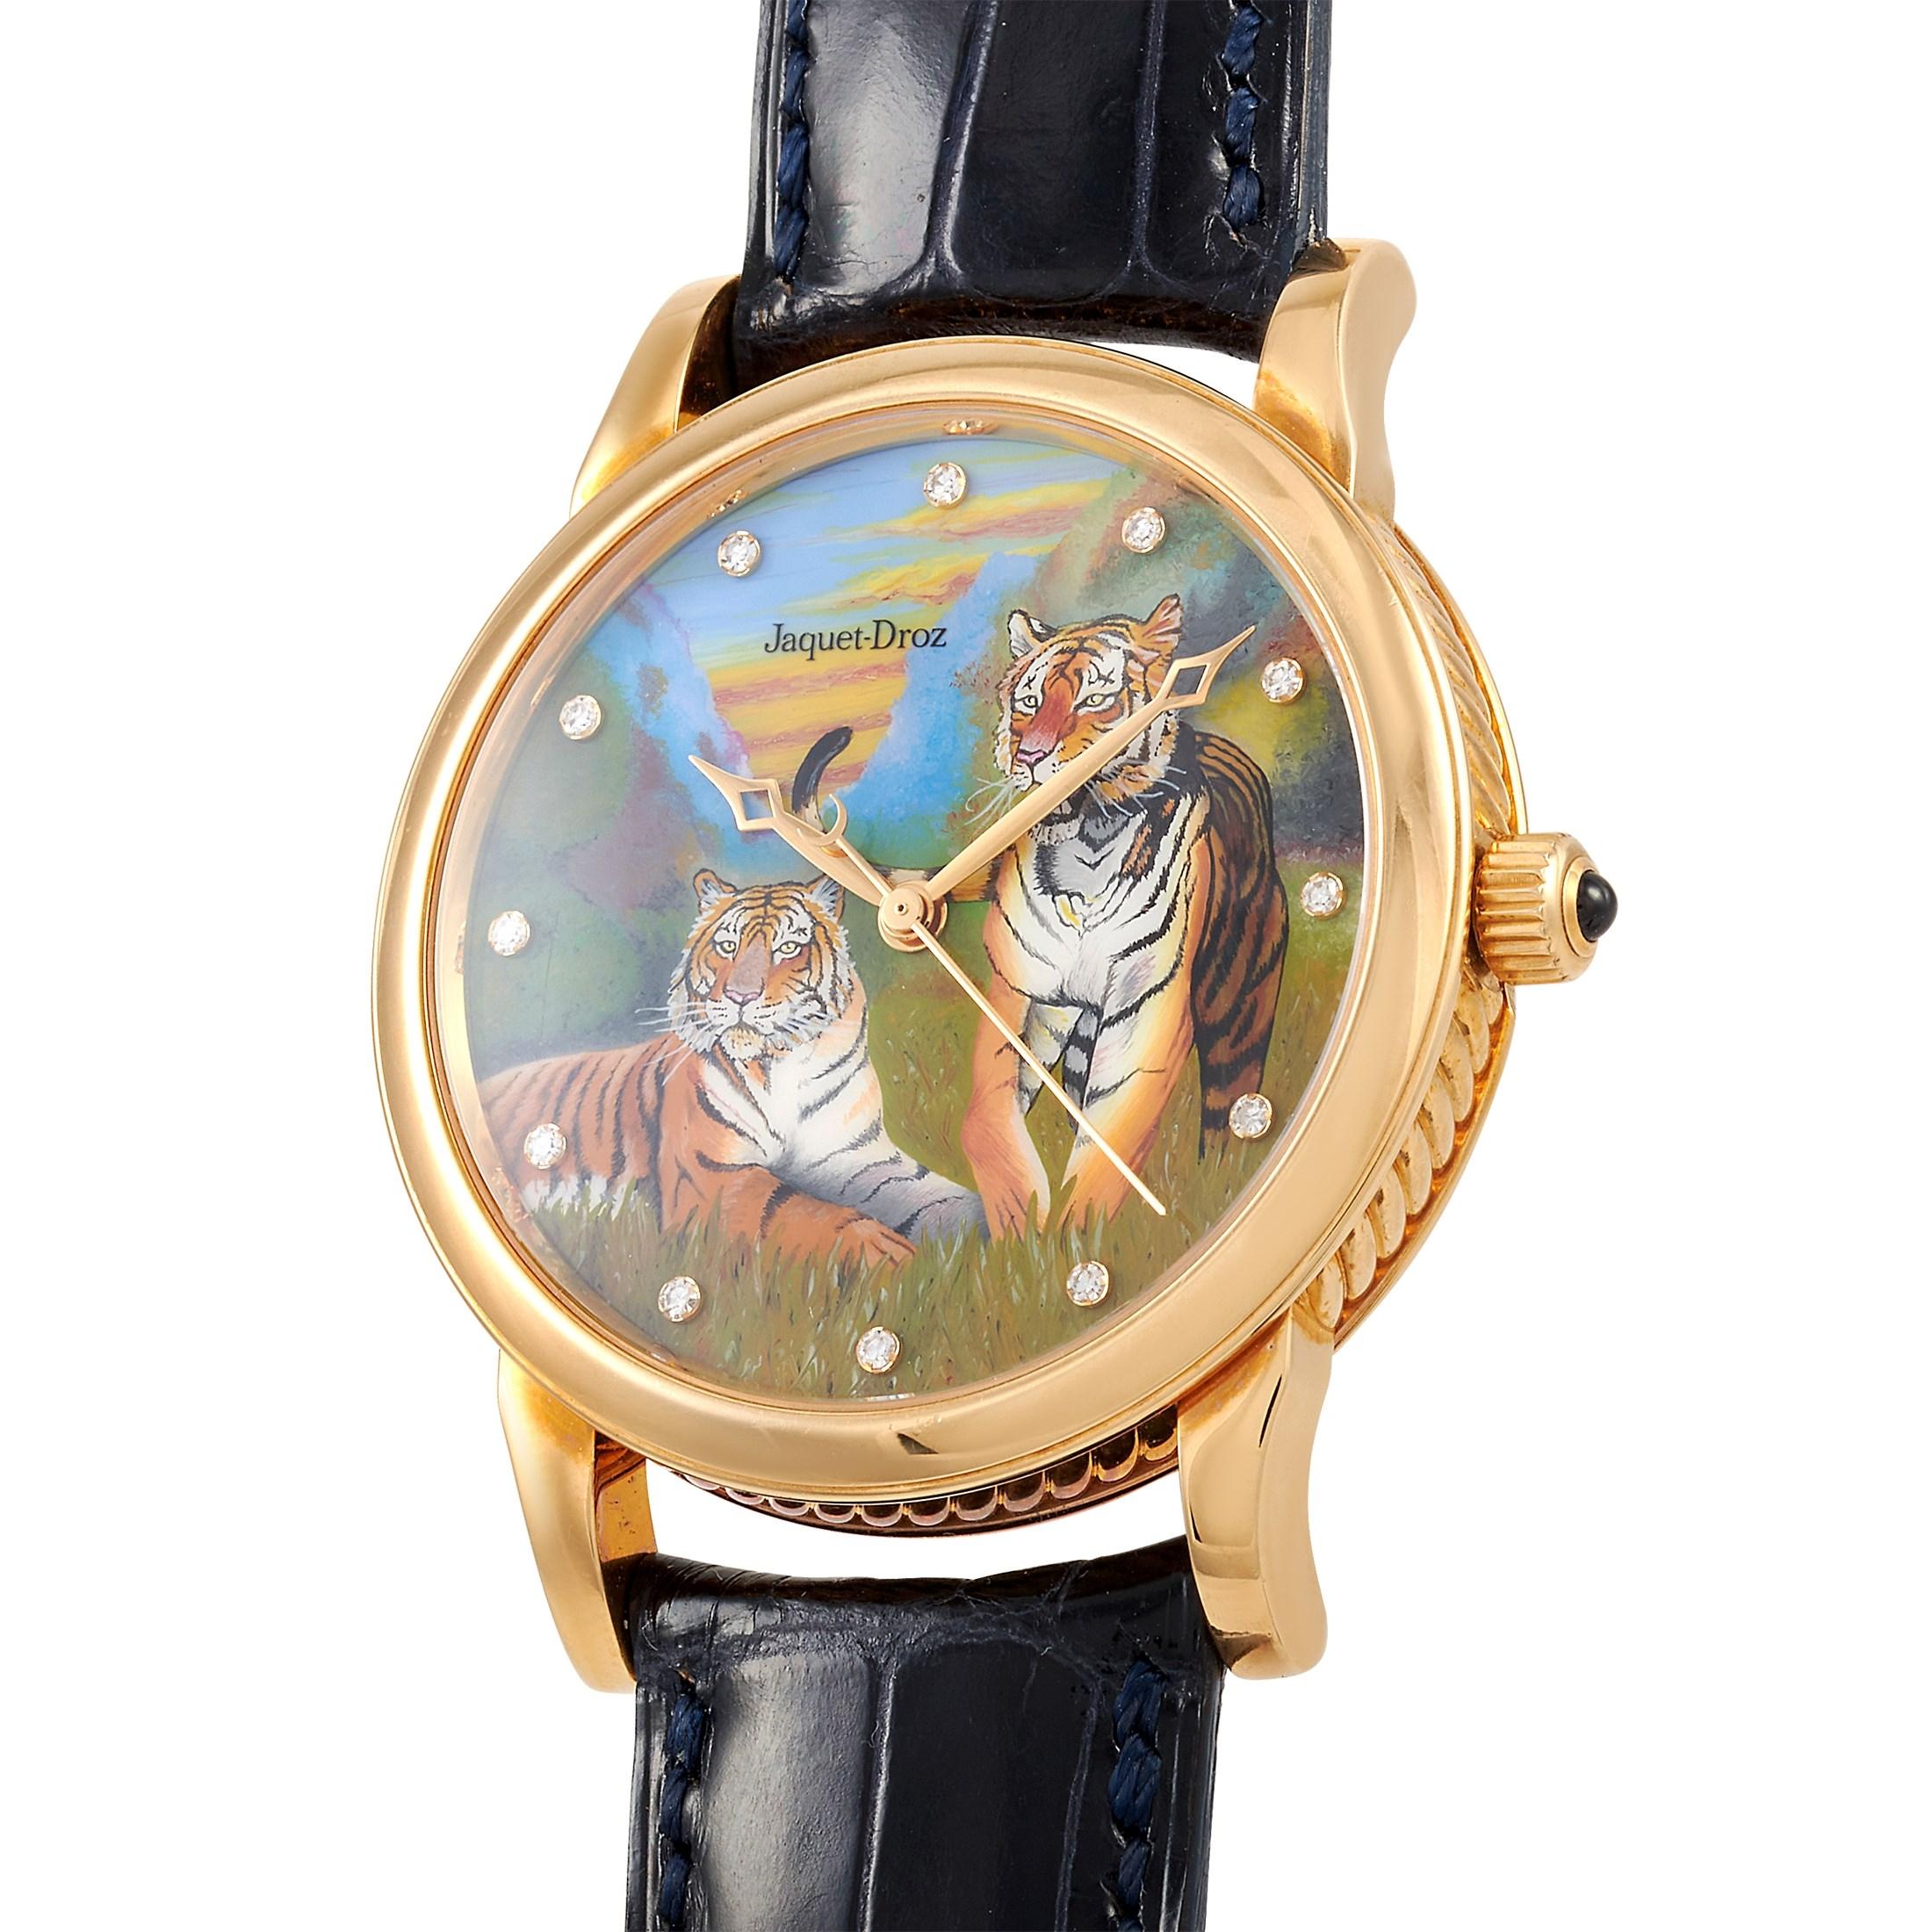 The Jaquet-Droz Tiger watch, reference number 2225, comes with a 36 mm 18K yellow gold case that boasts transparent back. The case is presented on a blue leather strap fitted with a tang buckle. This model is powered by a self-winding movement that